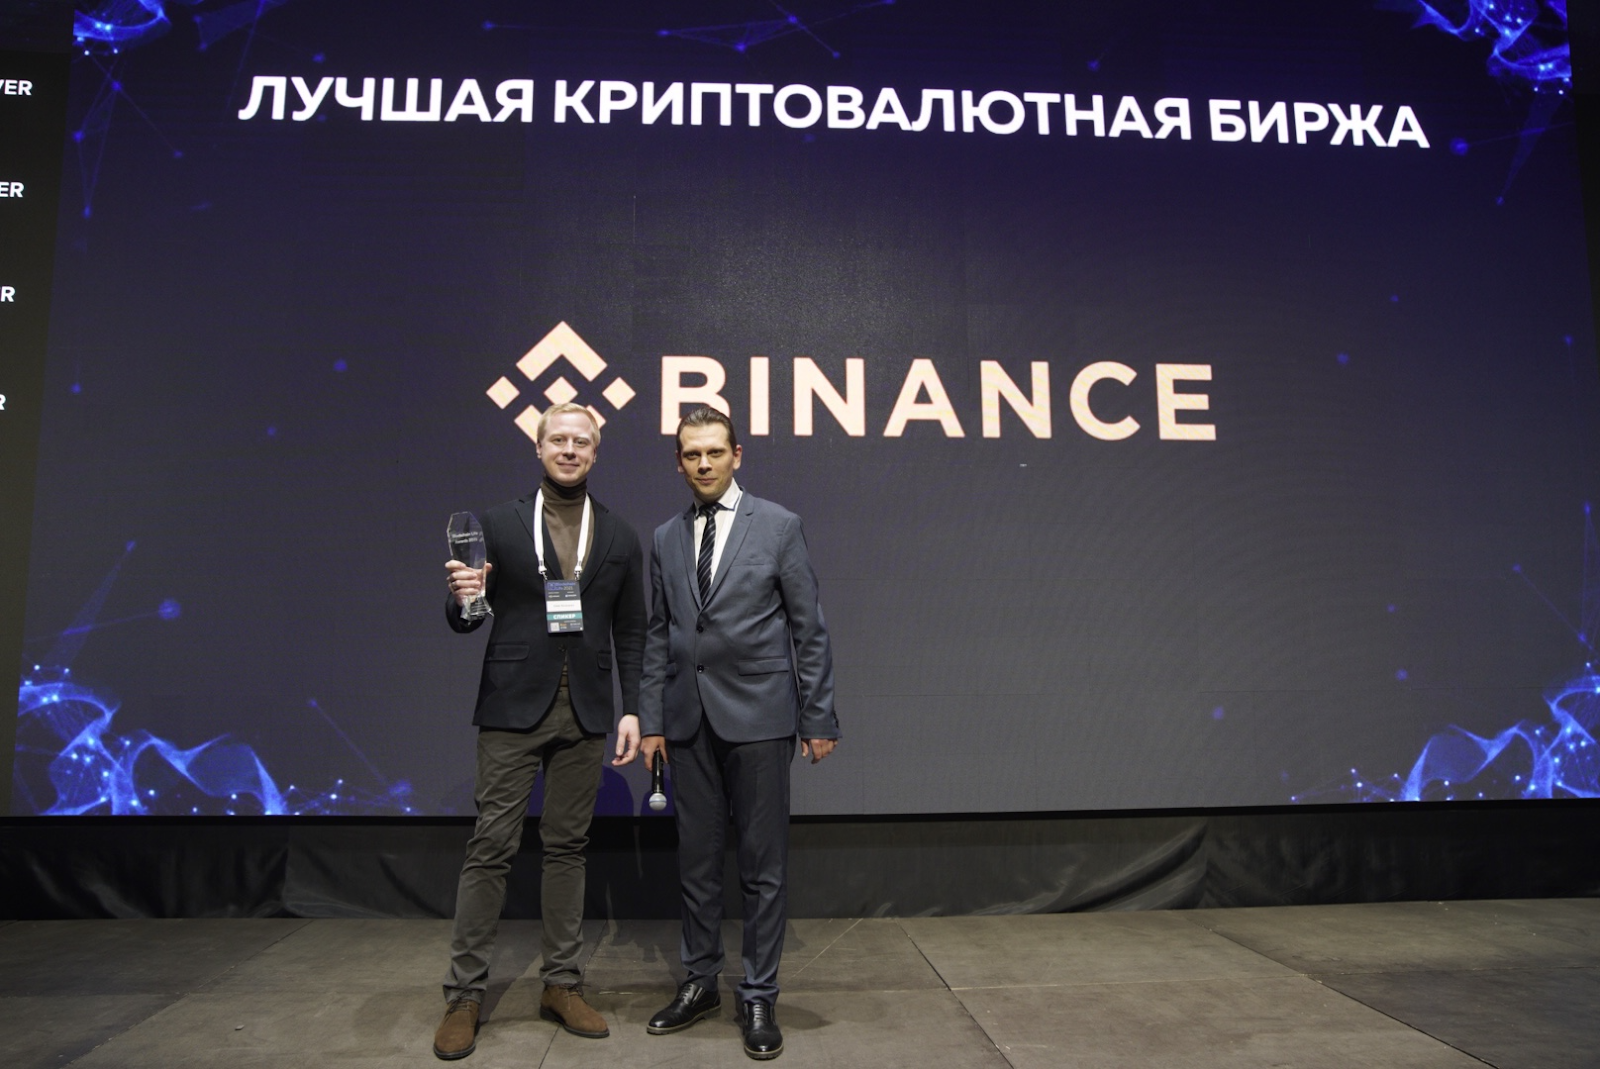 Binance won in "The best centralized cryptocurrency exchange".